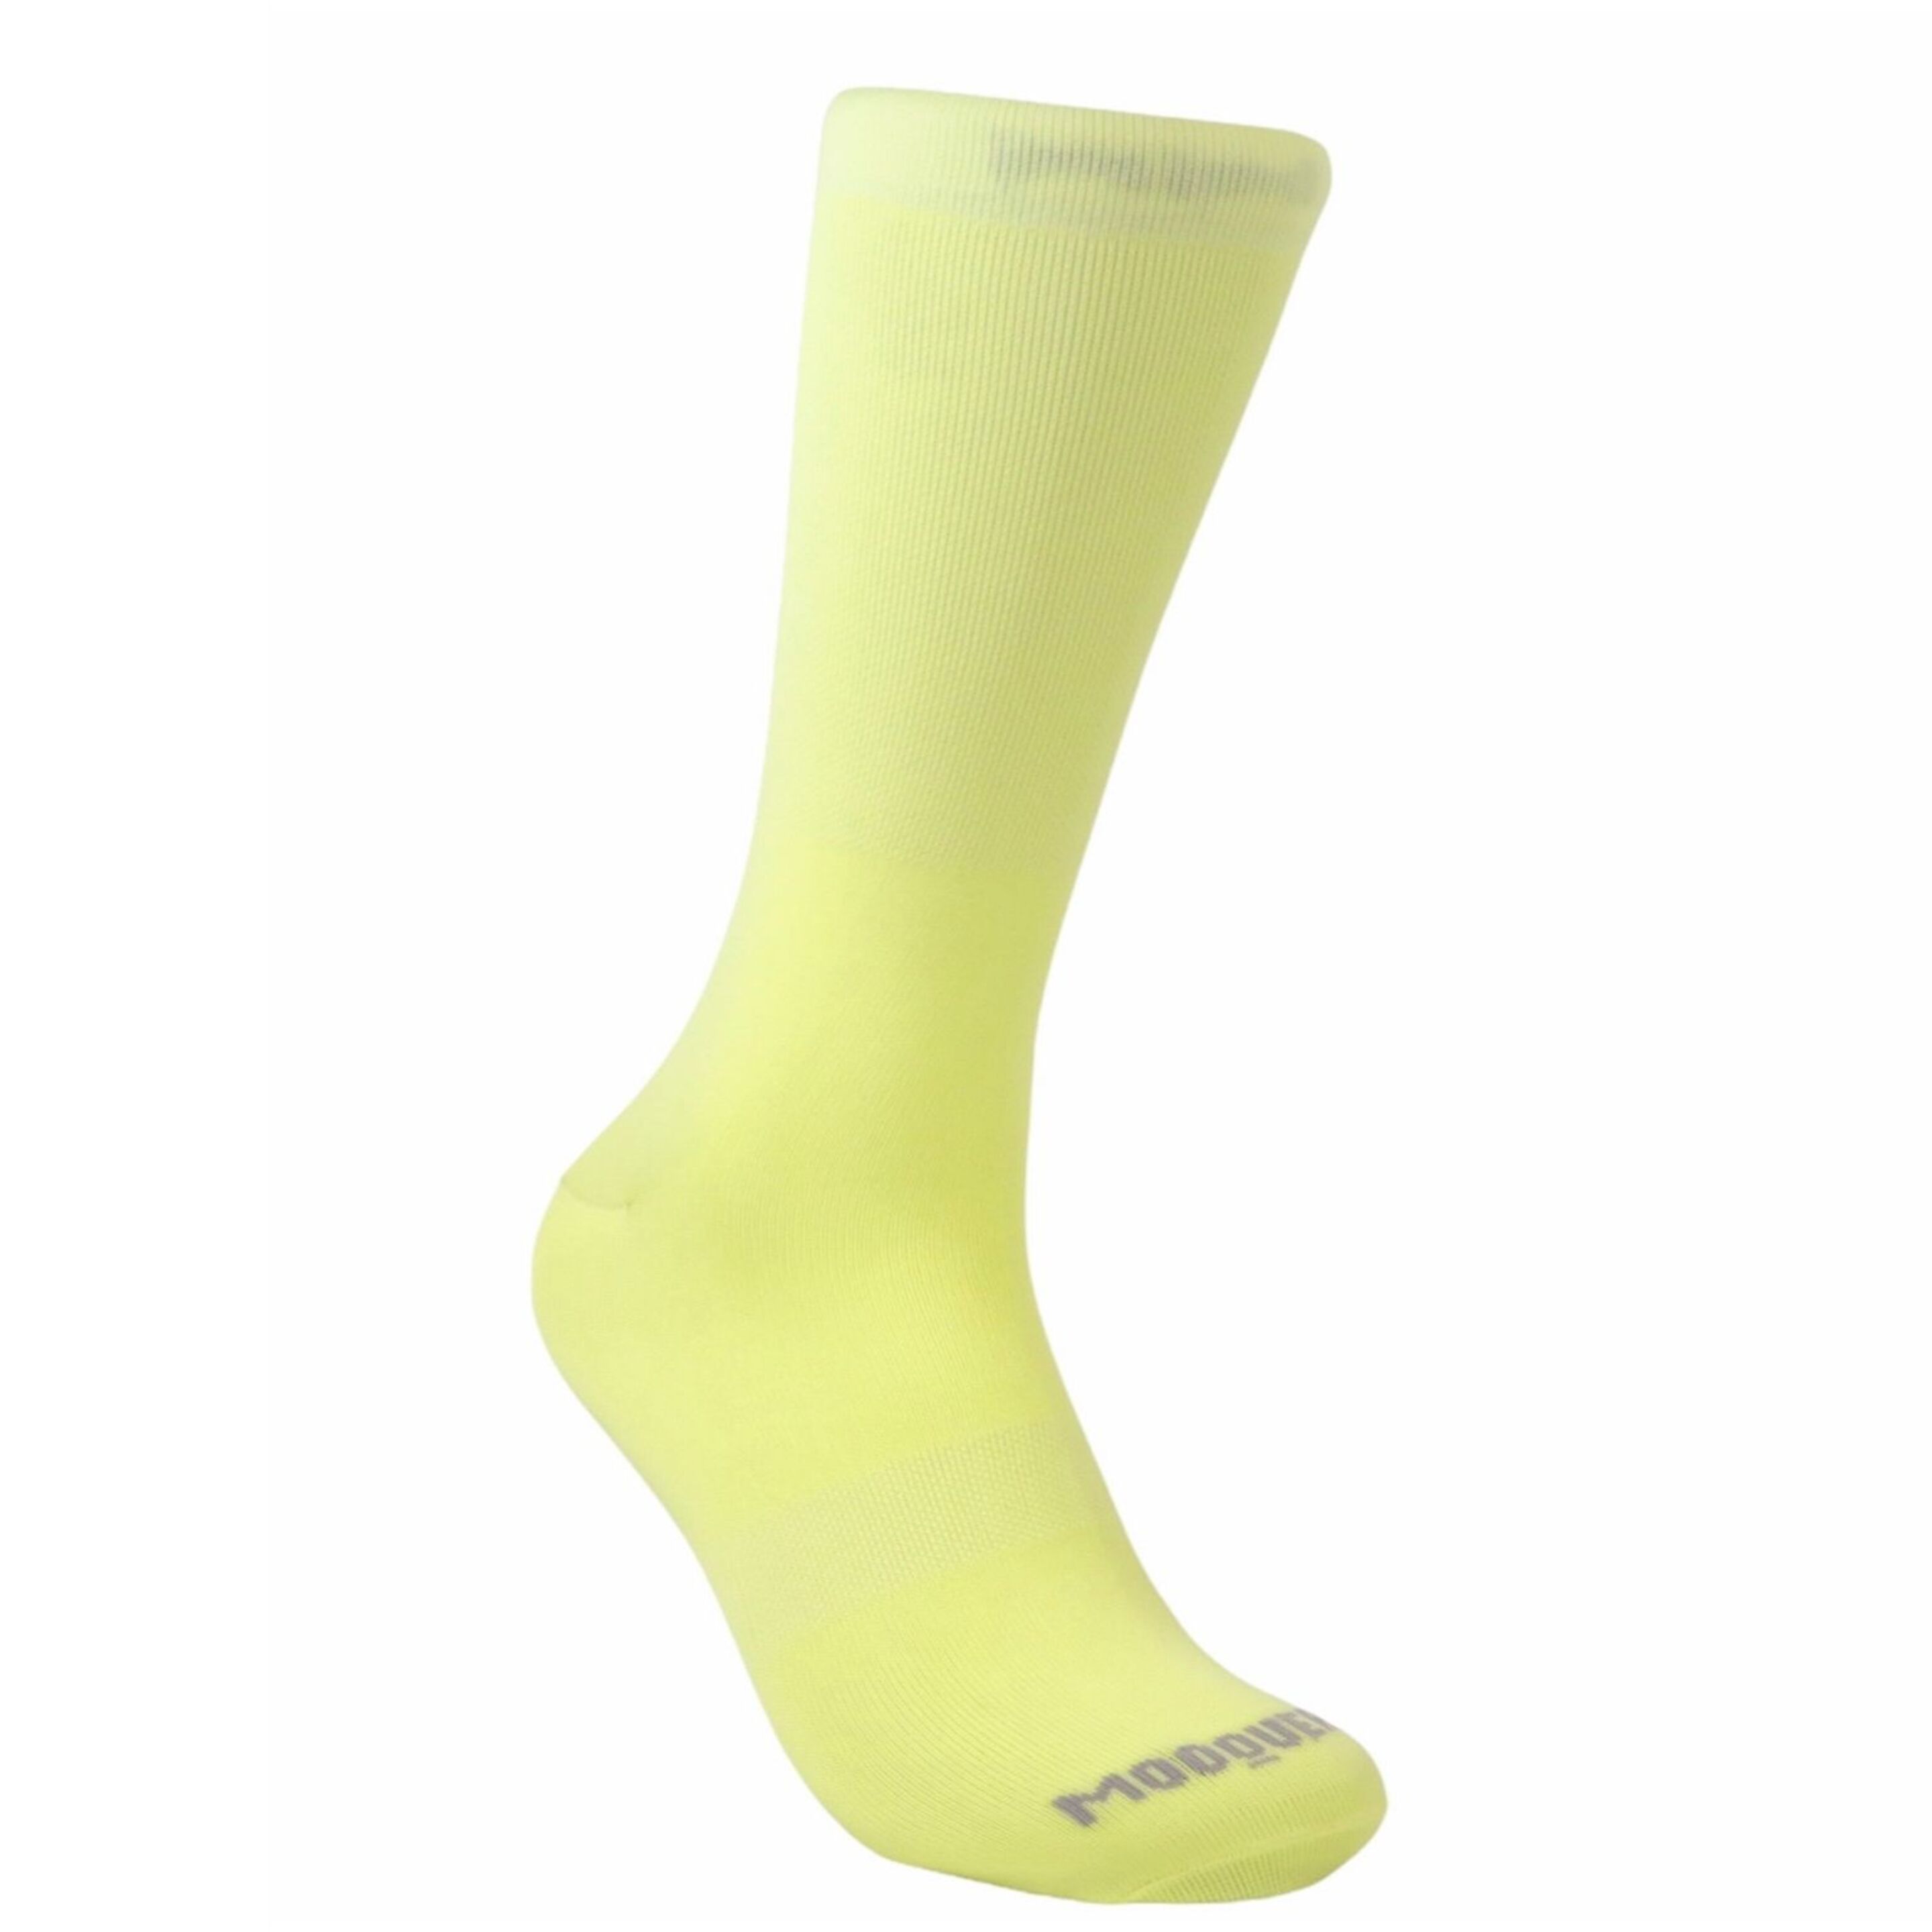 Calcetines Ciclismo Mooquer Classy Yellow - Amarillo  MKP